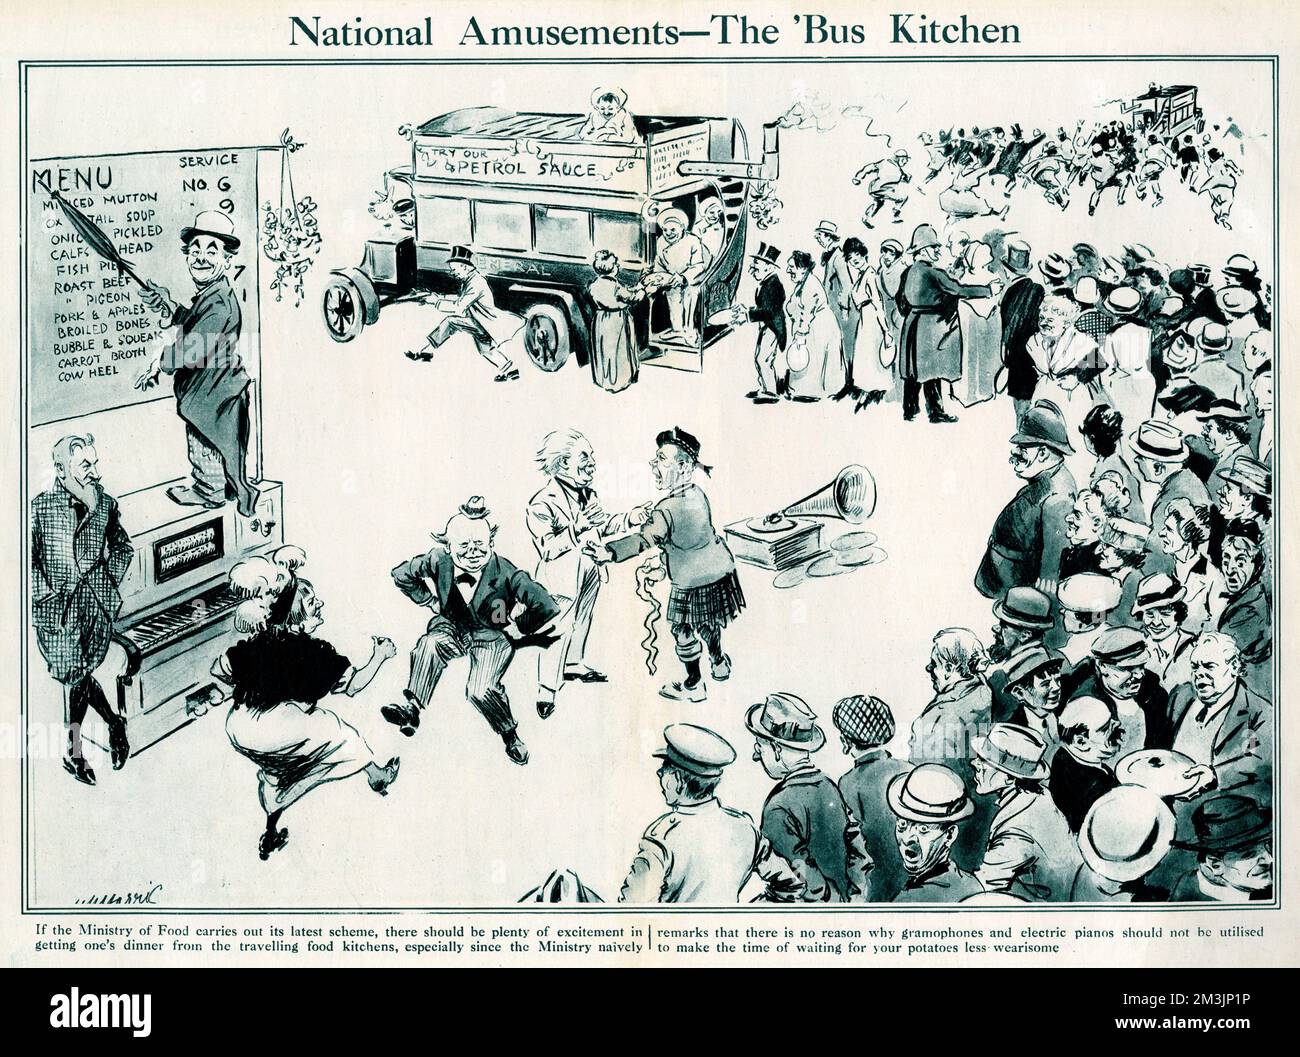 If the ministry of food carries out its latest scheme, there should be plenty of excitement in getting one's dinner from the travelling food kichens, especially since the ministry naively remarks that there is no reason why gramophones and electric pianos should not be utilised to make the time of waiting for your potatoes less wearisome.     Date: 1918 Stock Photo